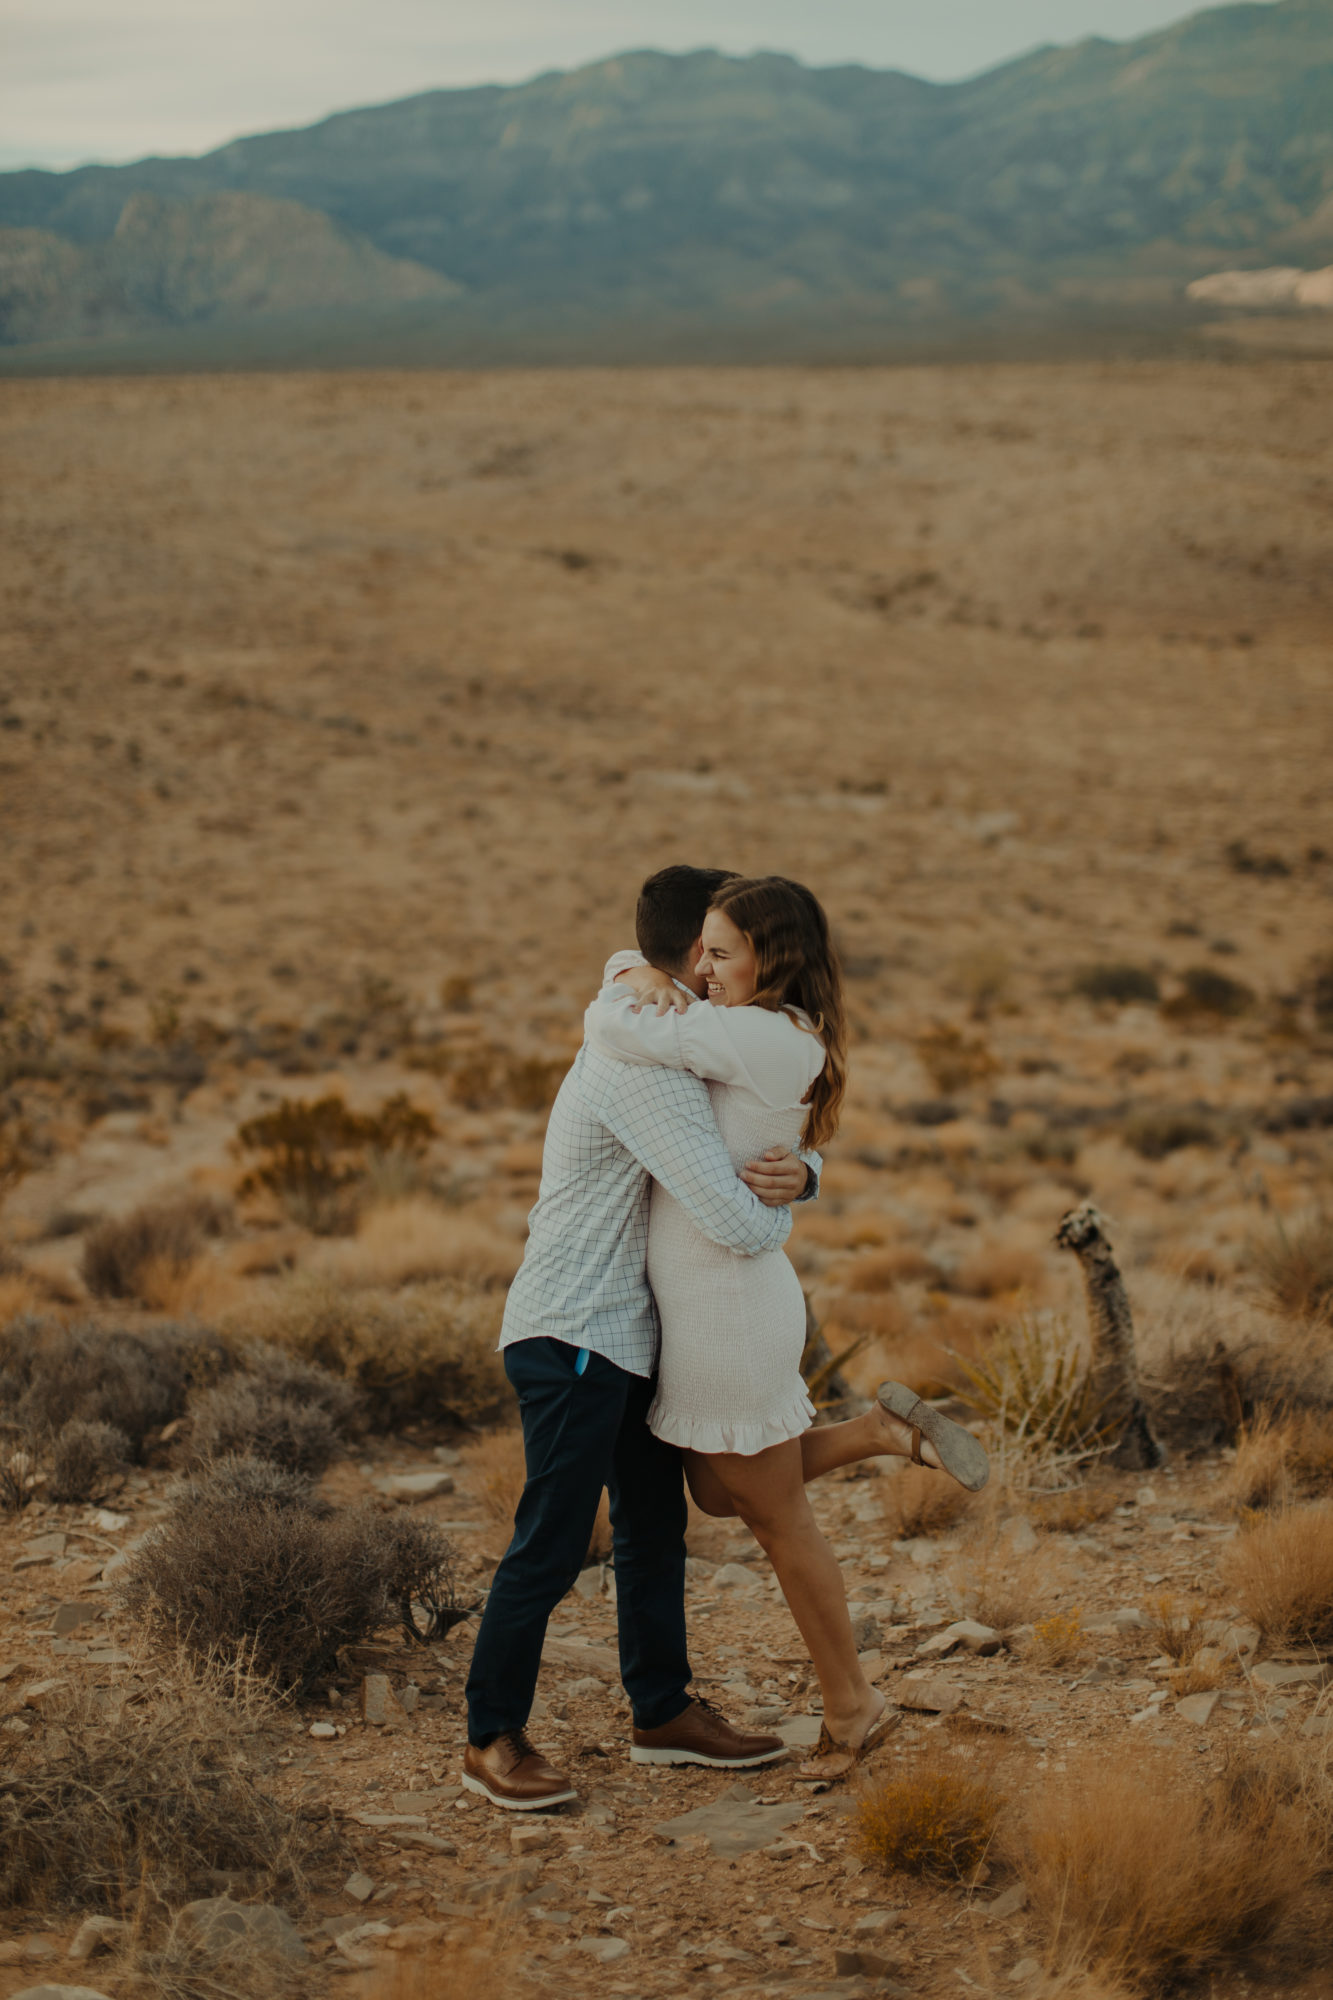 fiancee hugging her boyfriend after he proposed in the desert